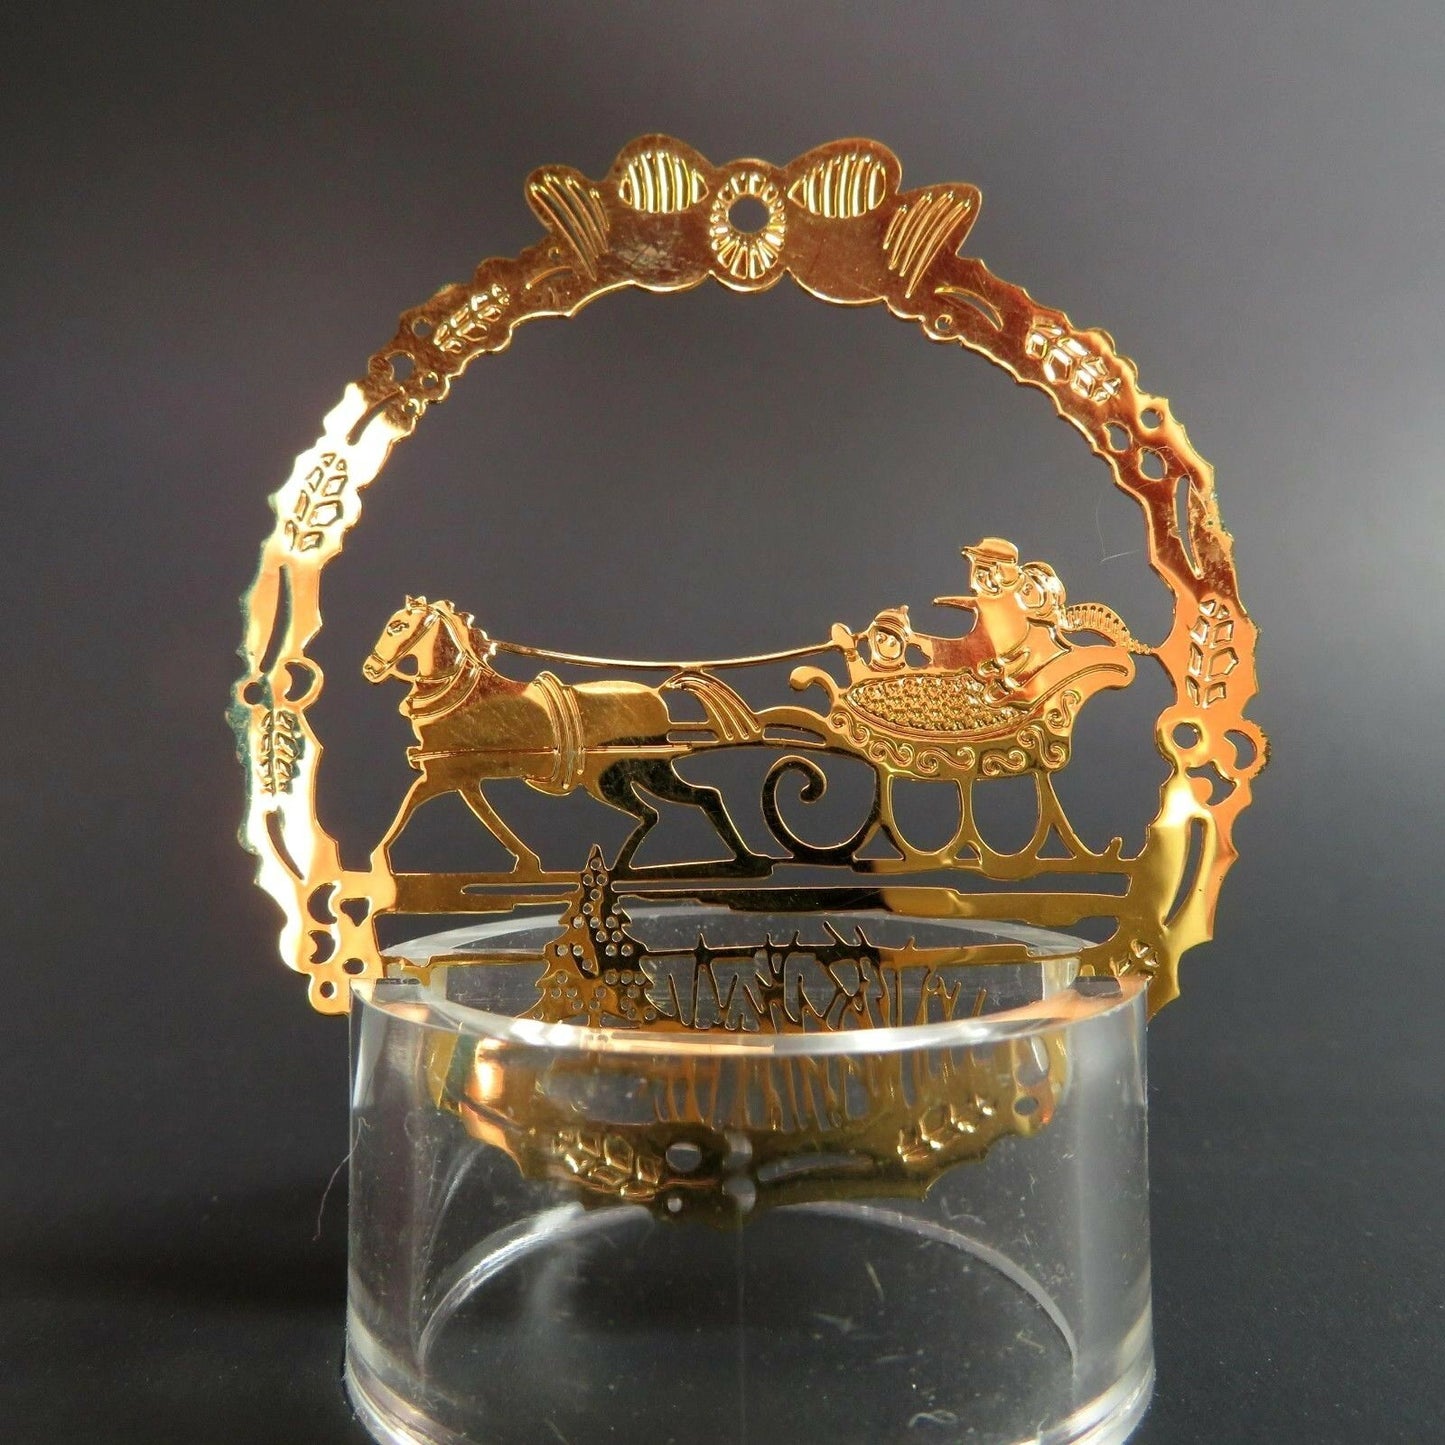 Vintage Sleigh Ride Christmas Ornament Hallmark Gold Metal Etched Embossed Scene - At Grandma's Table